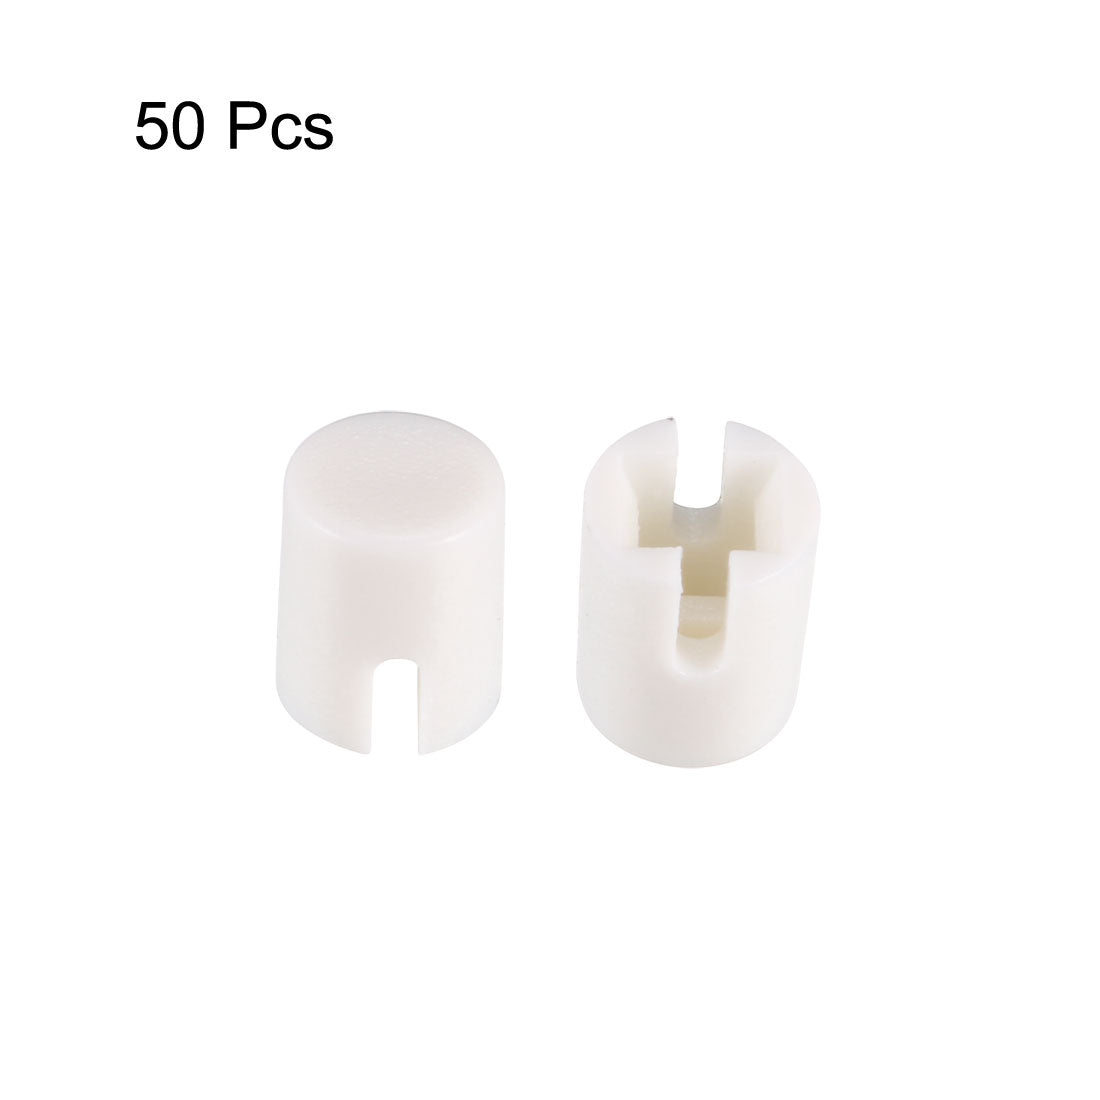 uxcell Uxcell 50Pcs Plastic 4.6x5.5mm Push Button Tactile Switch Caps Cover Keycaps White for 6x6x7.3mm Tact Switch